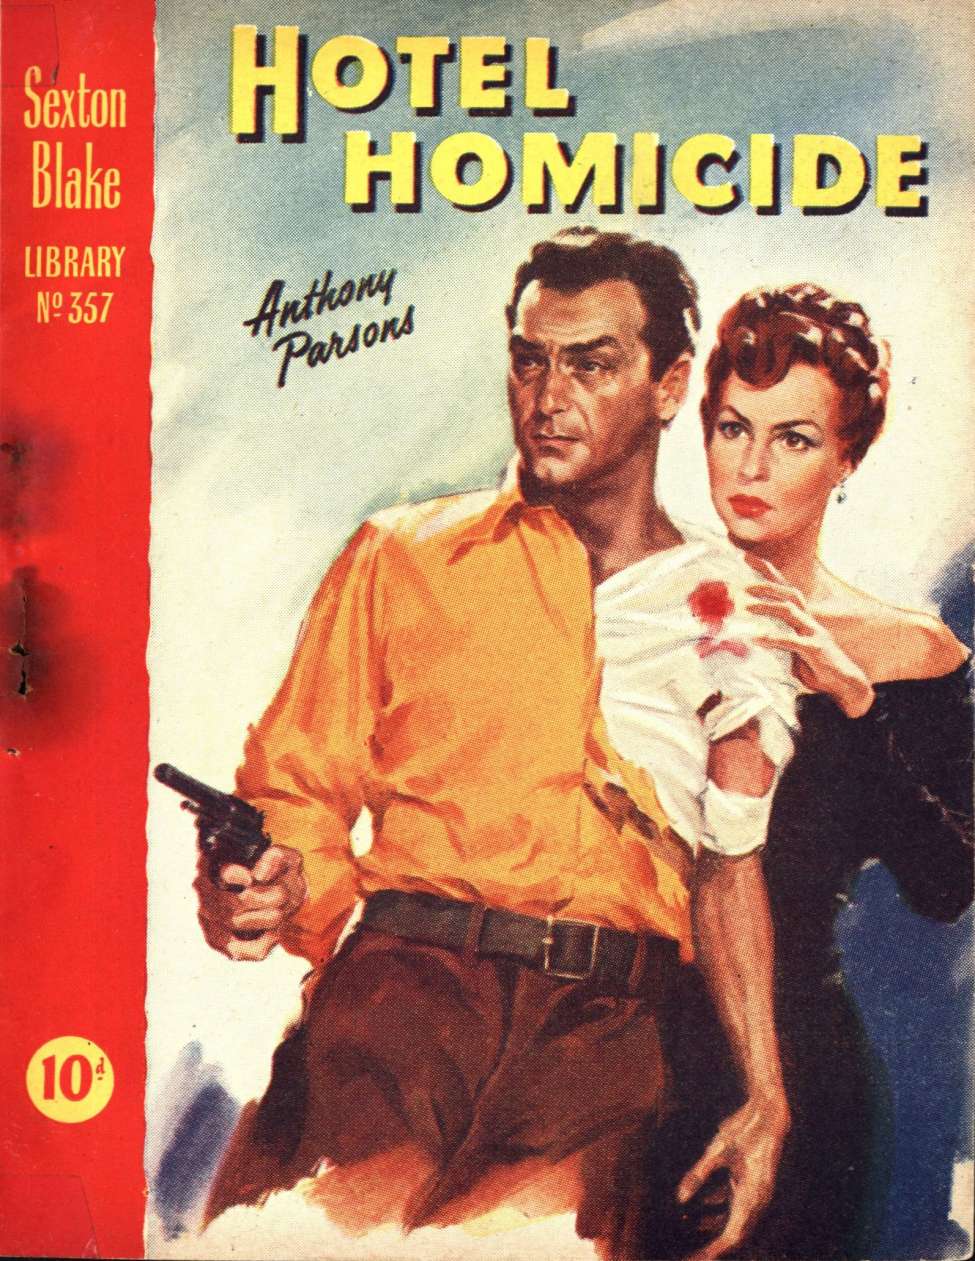 Book Cover For Sexton Blake Library S3 357 - Hotel Homicide